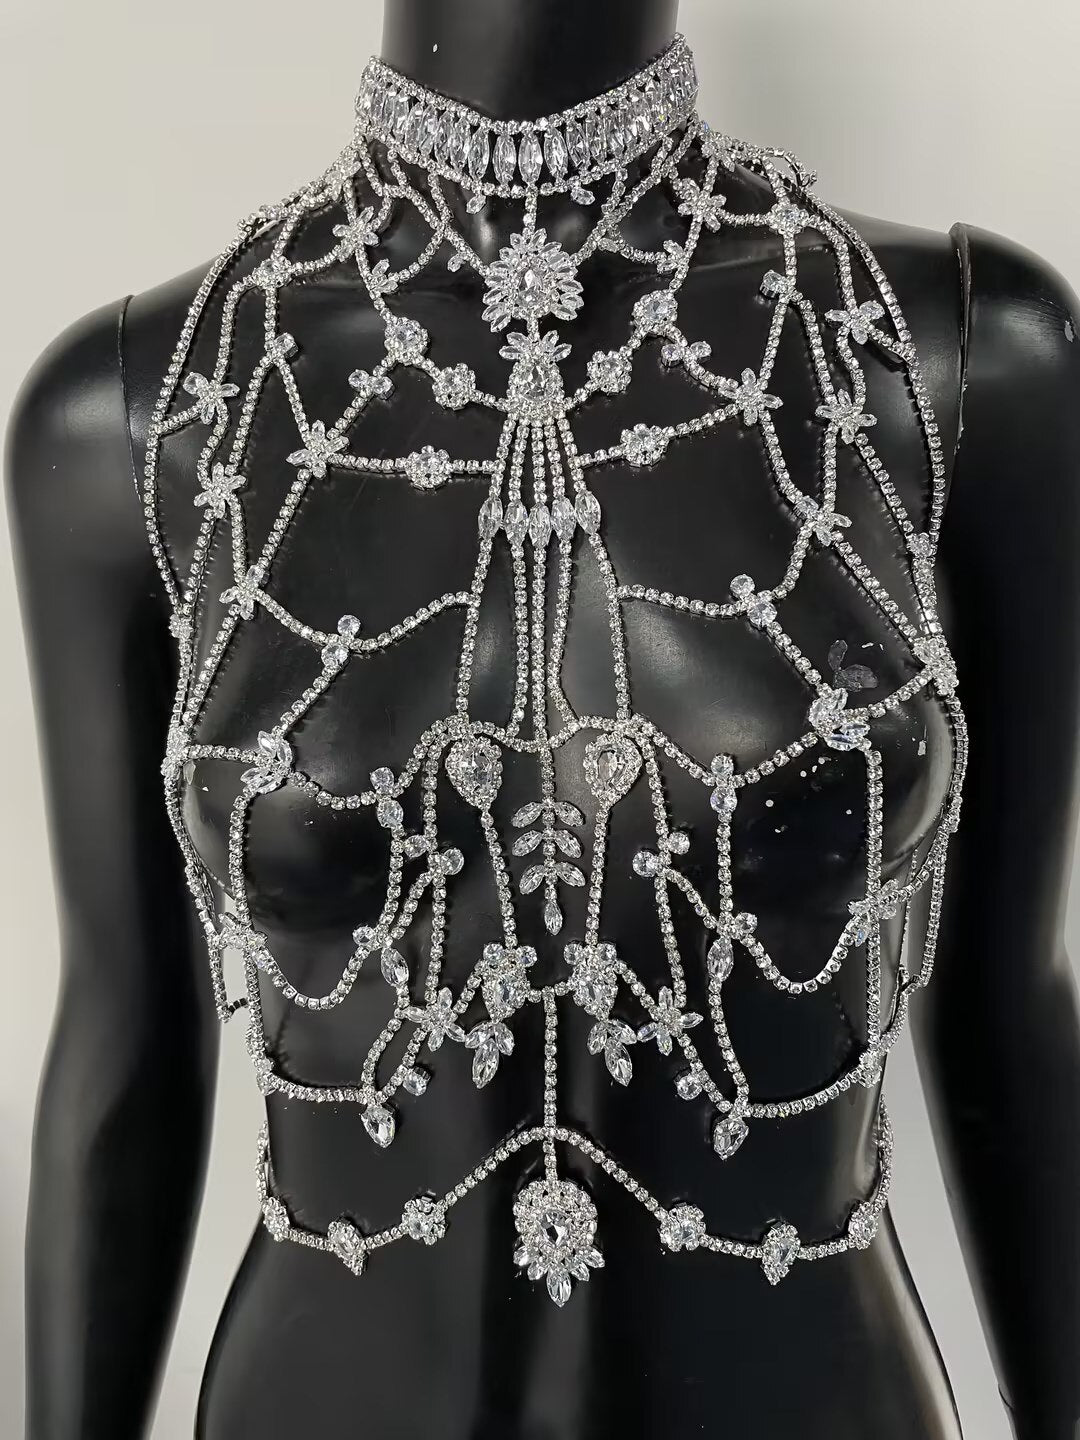 Sleeveless Top Rhinestone Body Chain Harness for Women Rave Clothing Hollow Crystal Lingerie Chain Bra Party Jewelry Body Jewelry